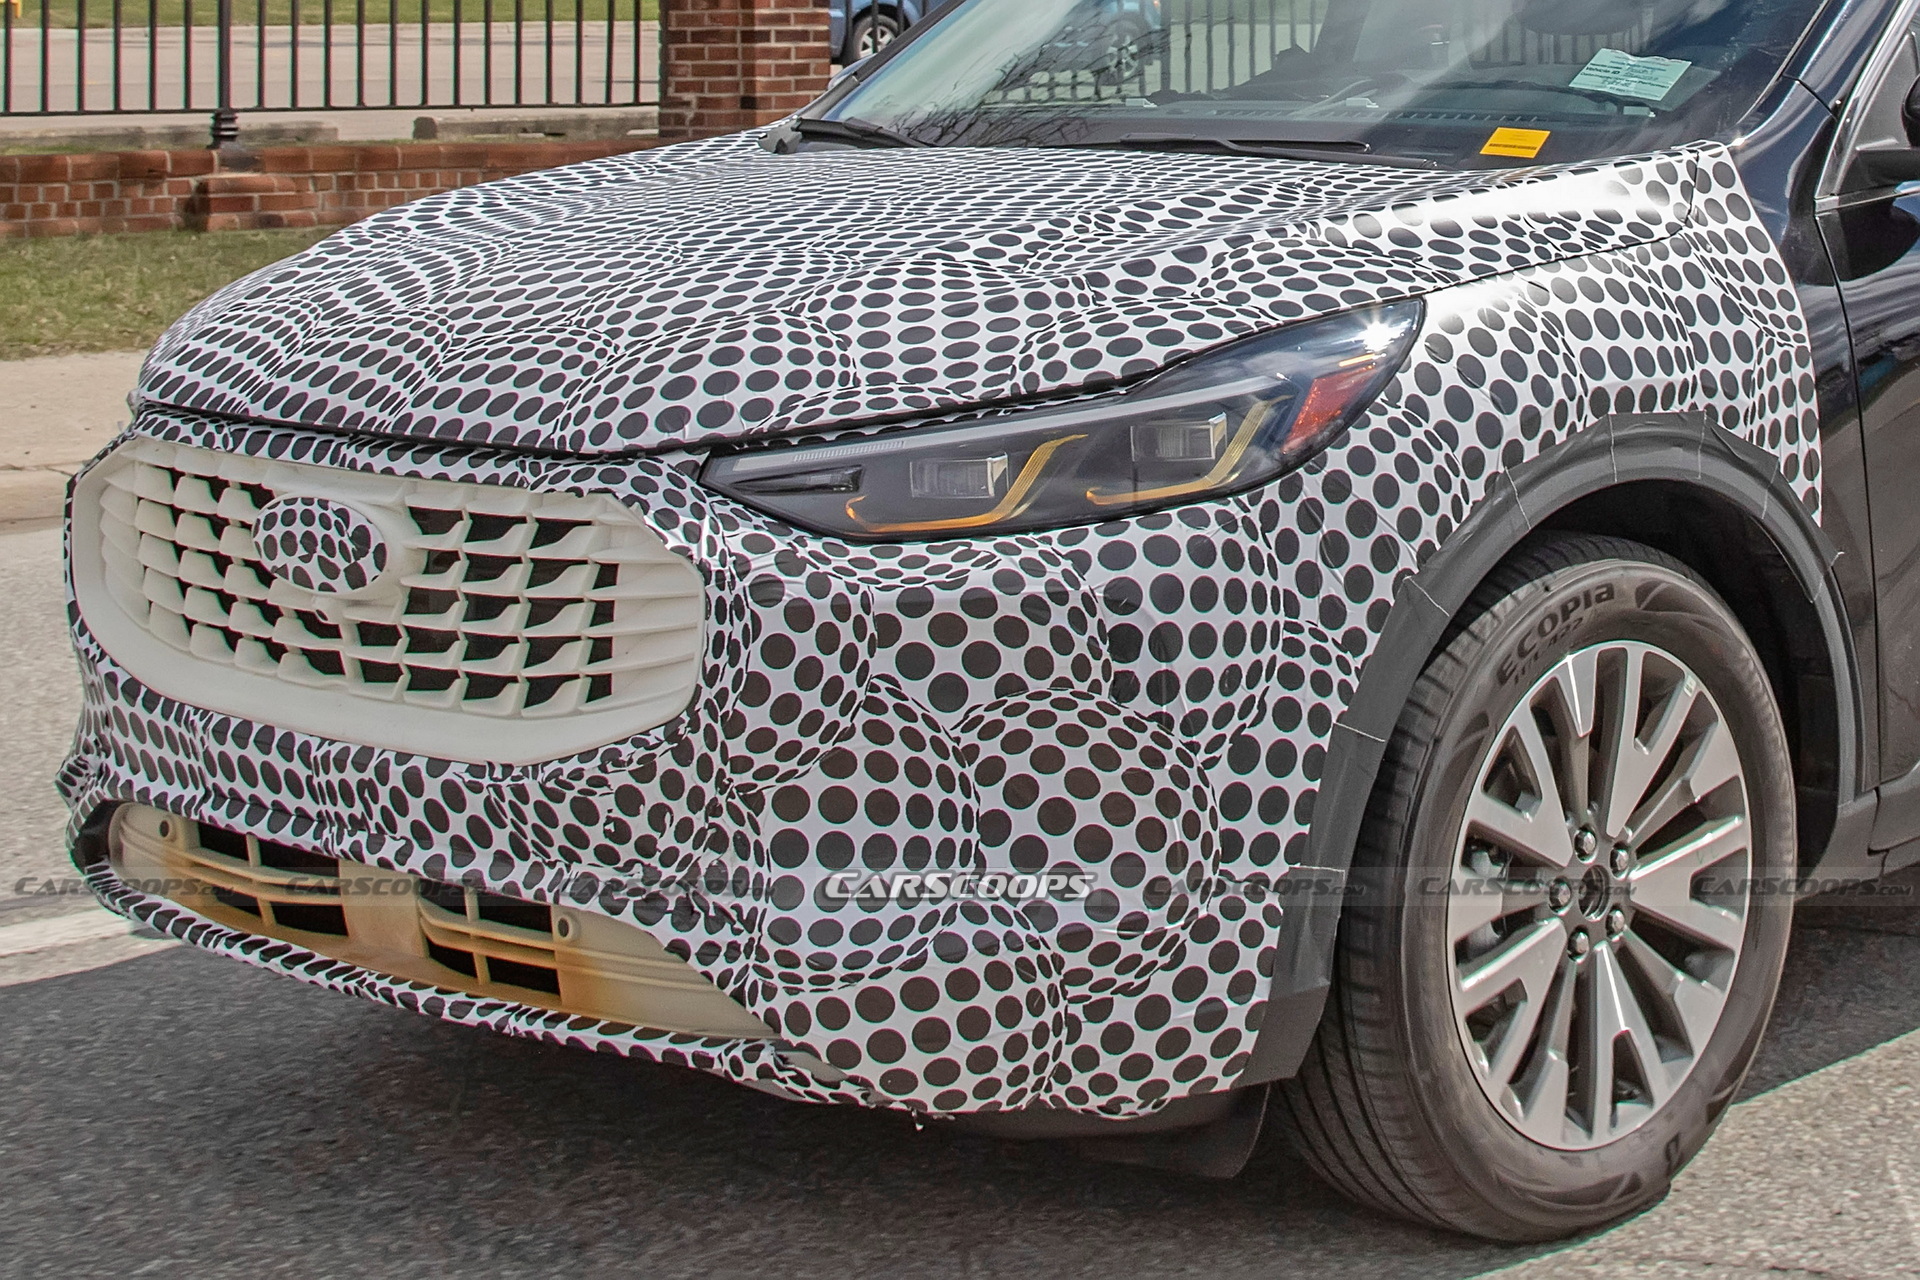 2023 Ford Escape Caught Out In Public Revealing Grille Shape And Lighting